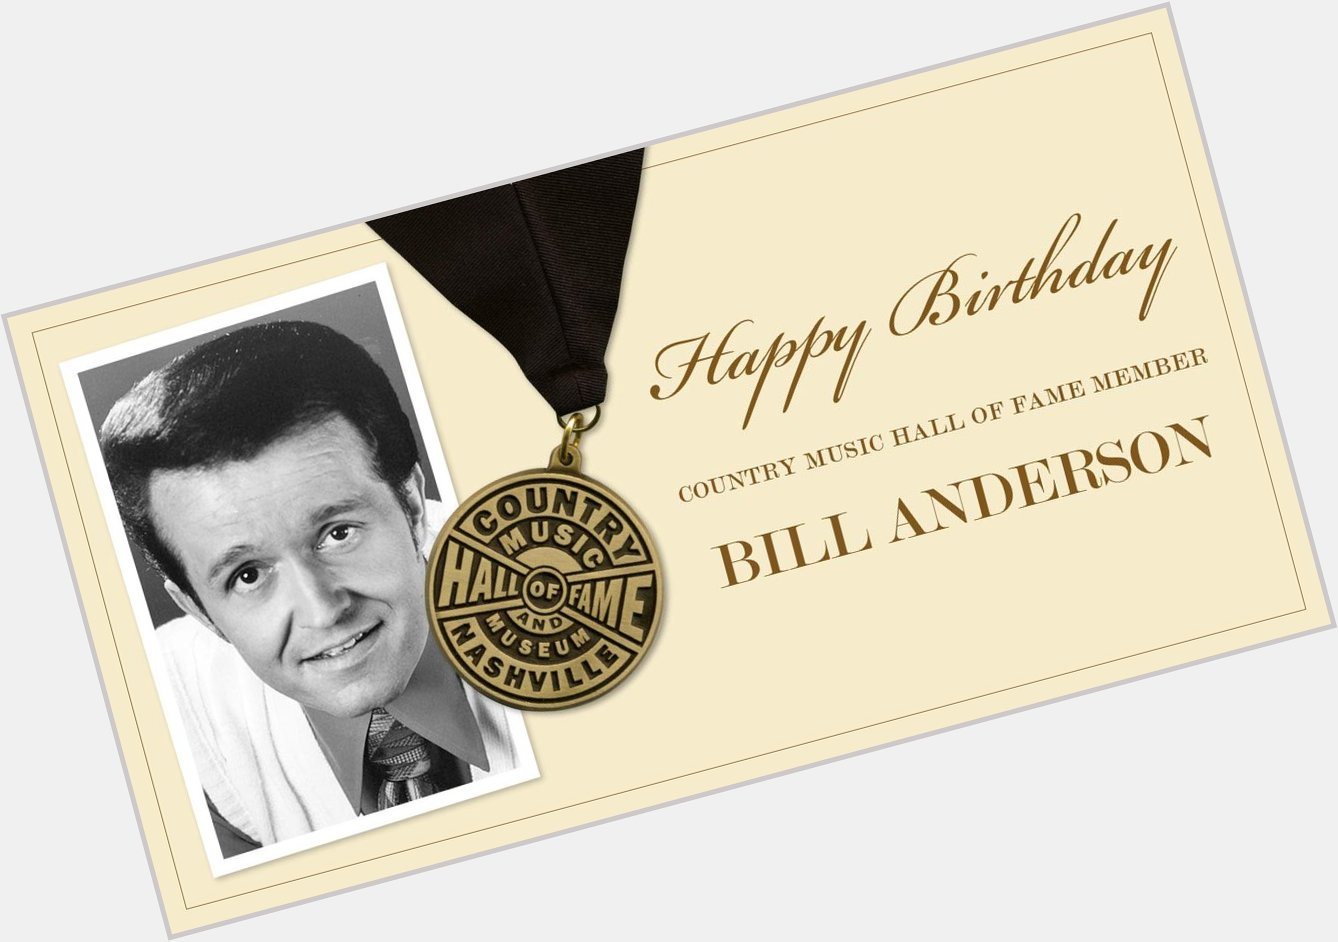 Help us wish a very Happy Birthday to Country Music Hall of Fame member Bill Anderson ( 